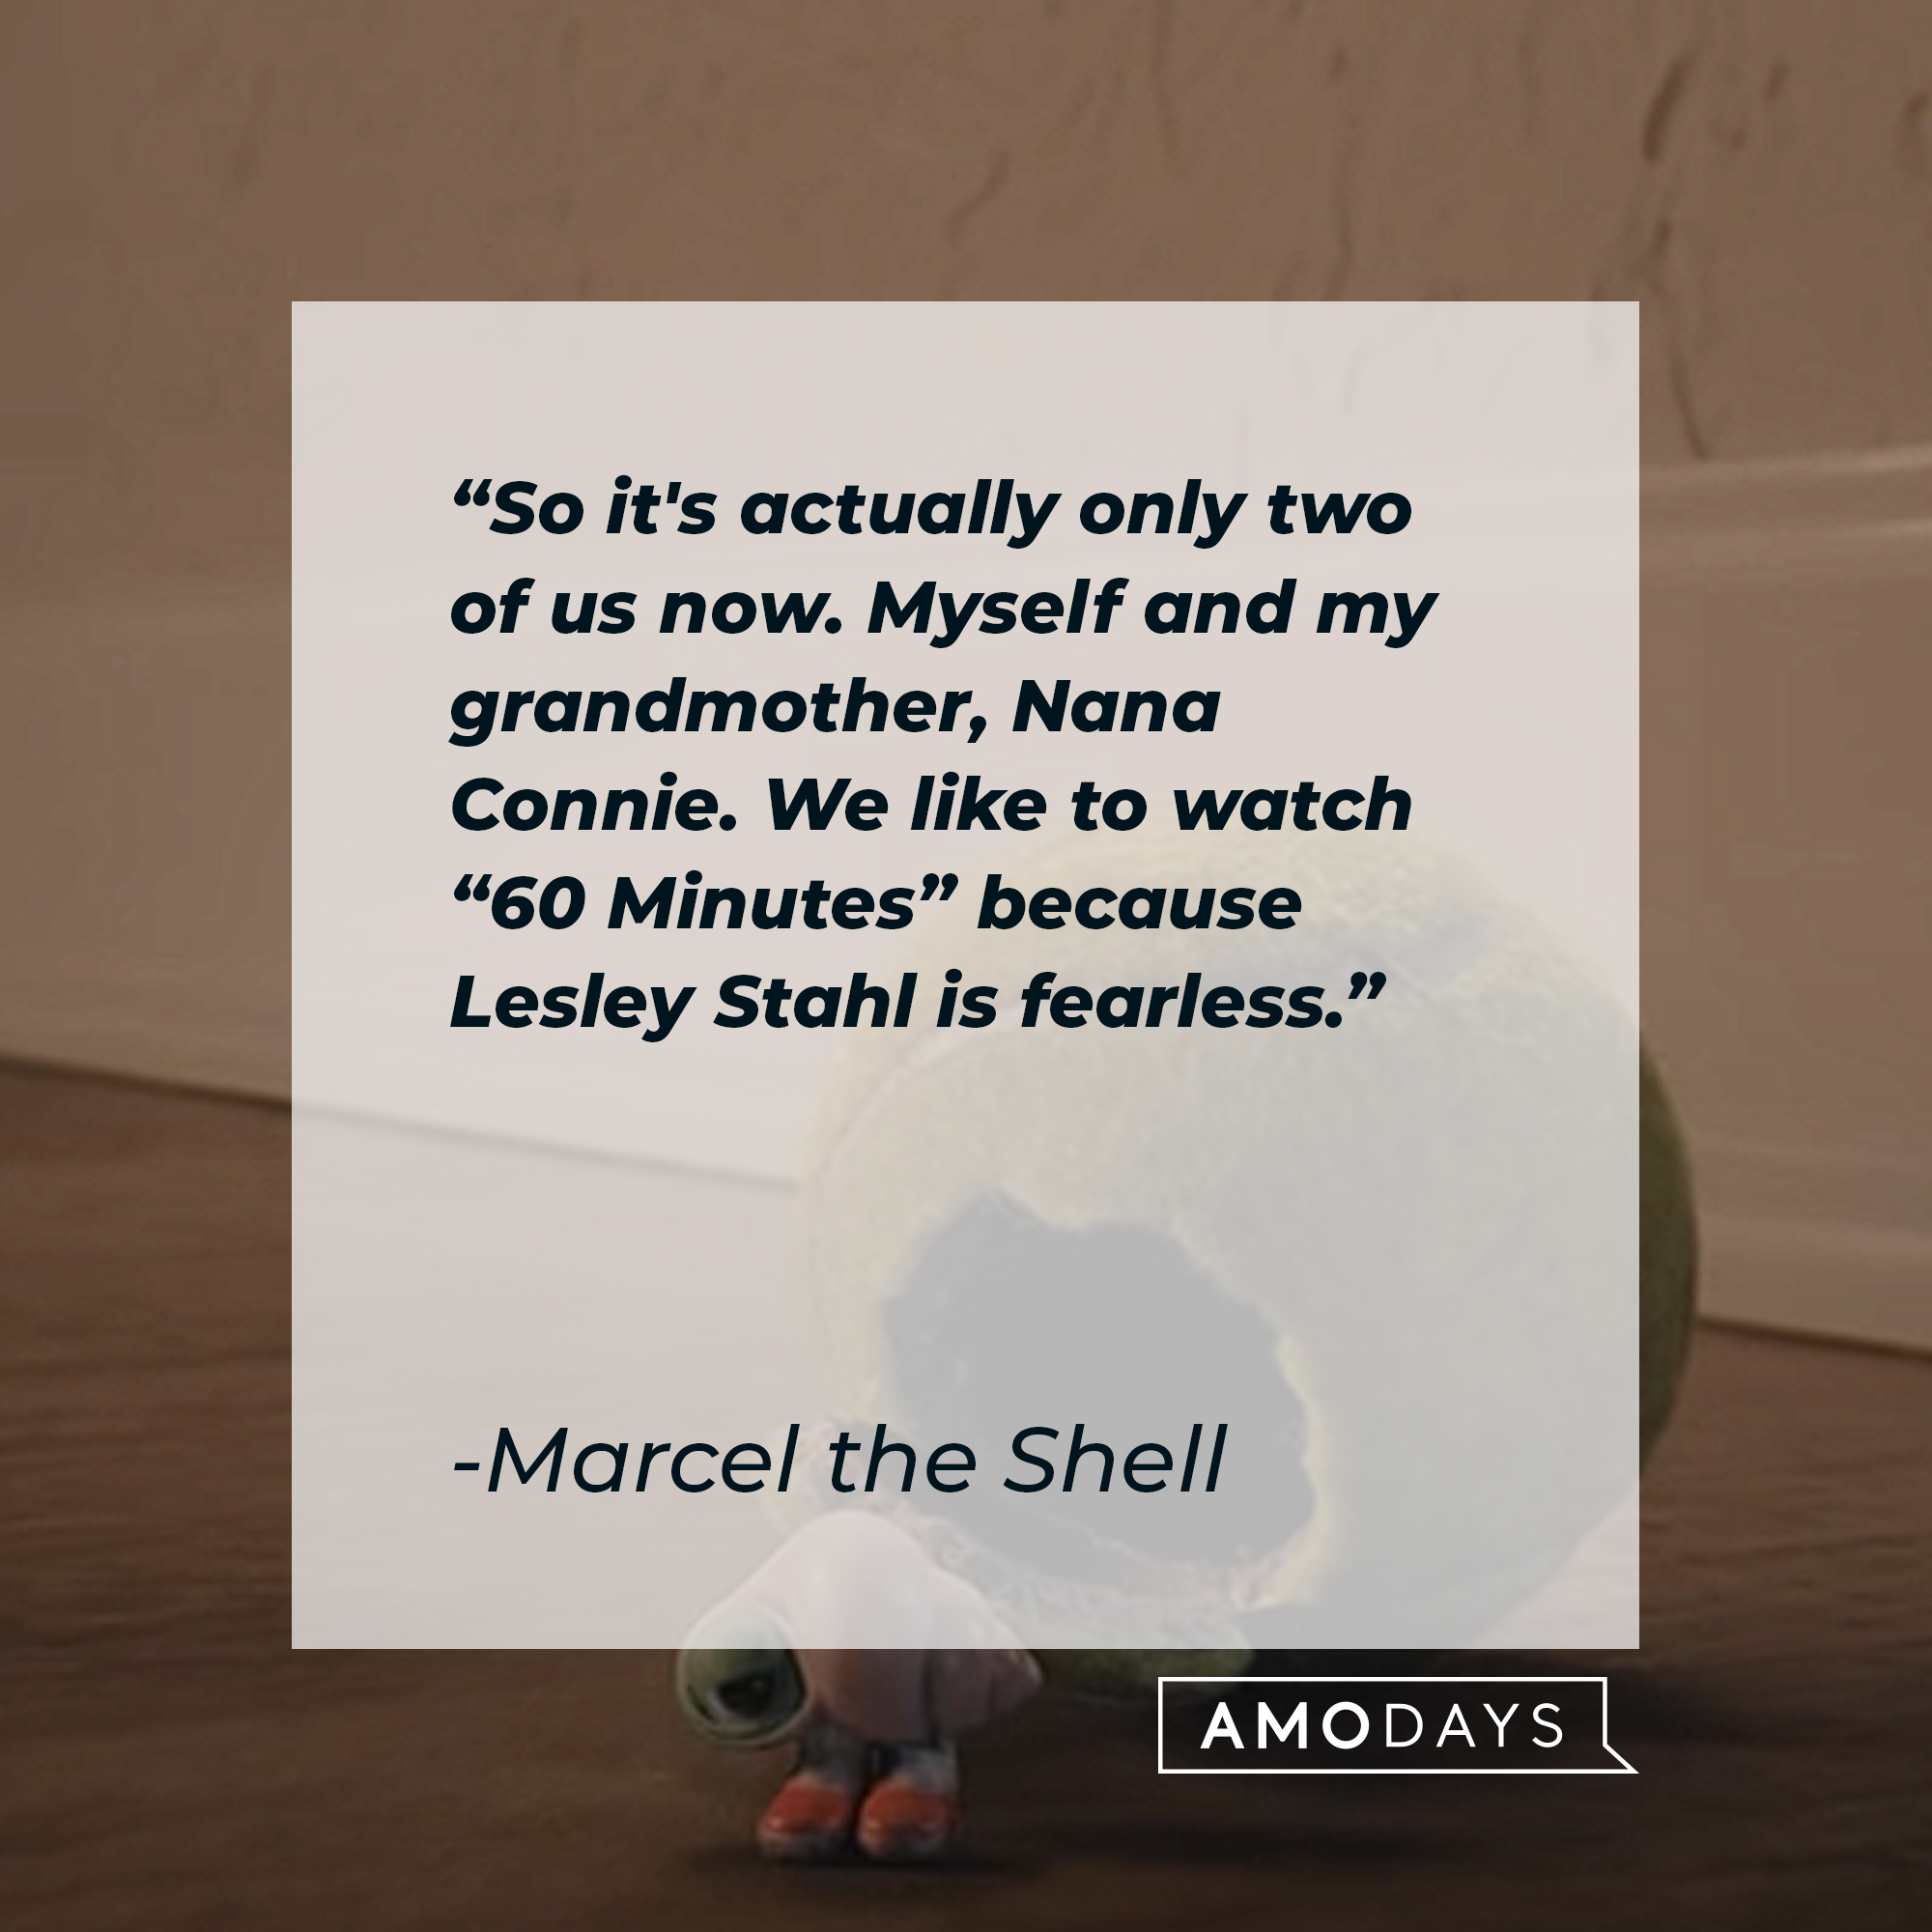 Marcel the Shell's quote: “So it's actually only two of us now. Myself and my grandmother, Nana Connie. We like to watch "60 Minutes" because Lesley Stahl is fearless.” | Source: youtube.com/A24